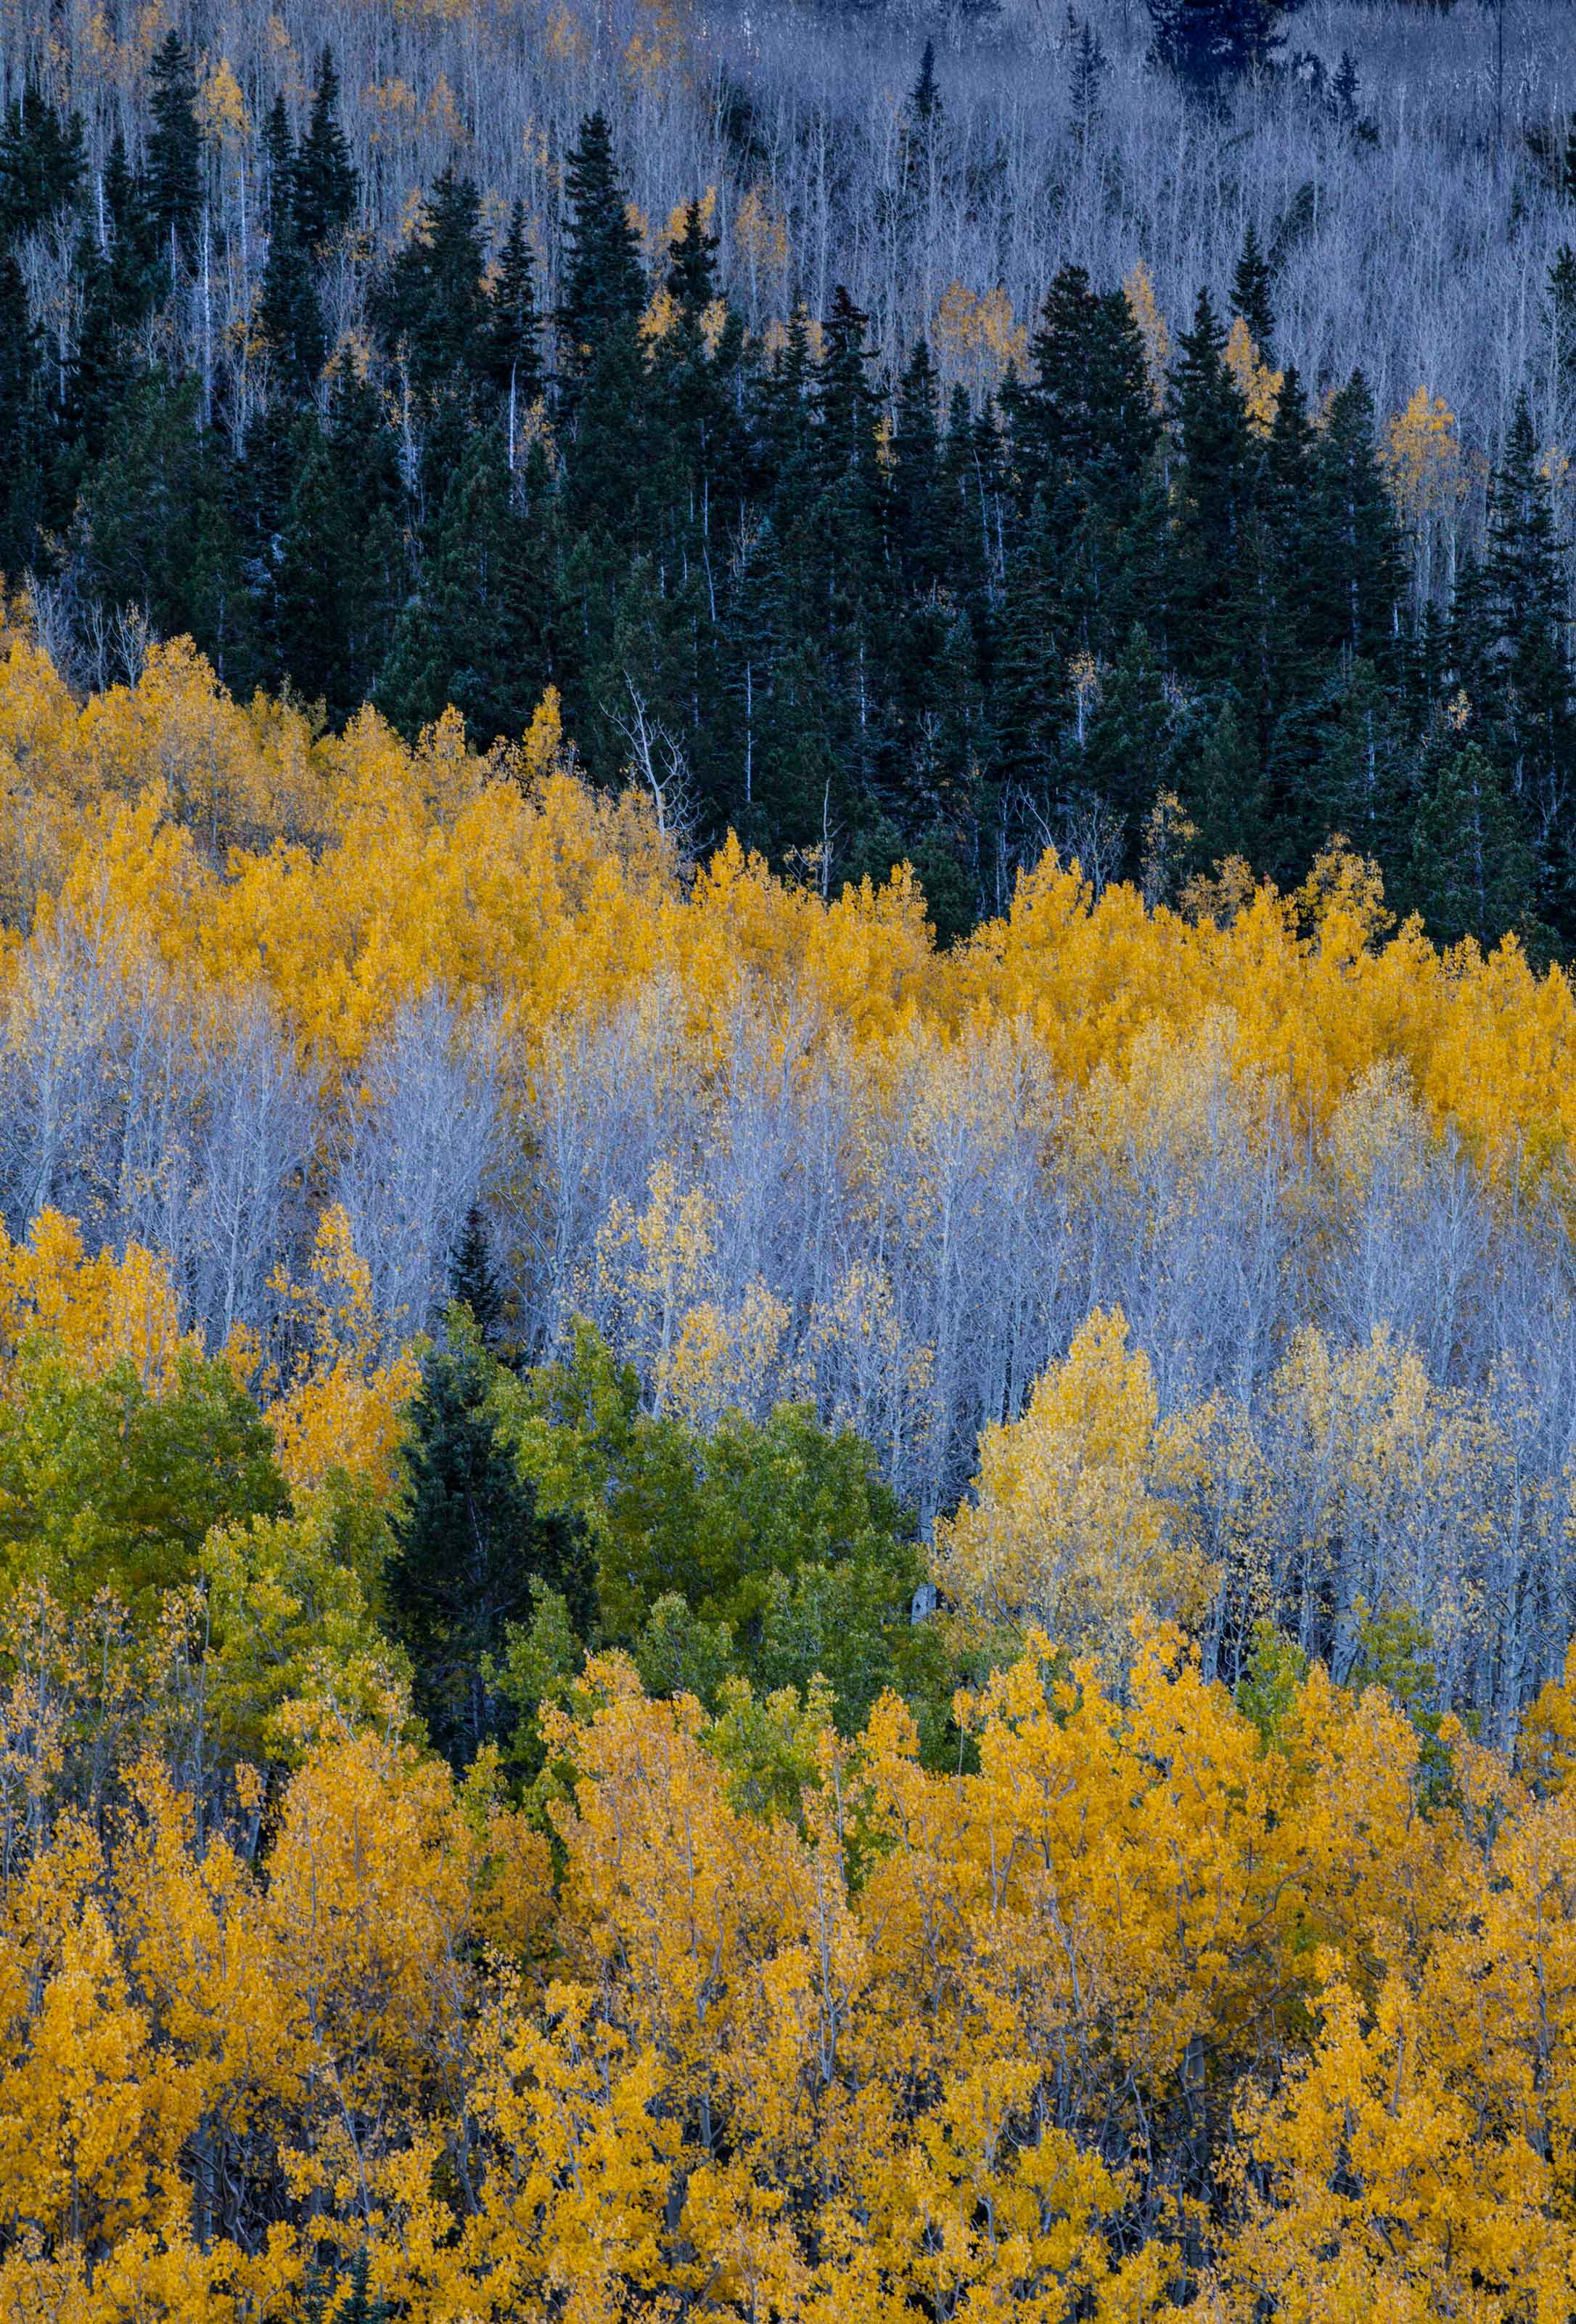 Aspen trees with fall colors at Lockett Meadow in the San Francisco Peaks of northern Arizona